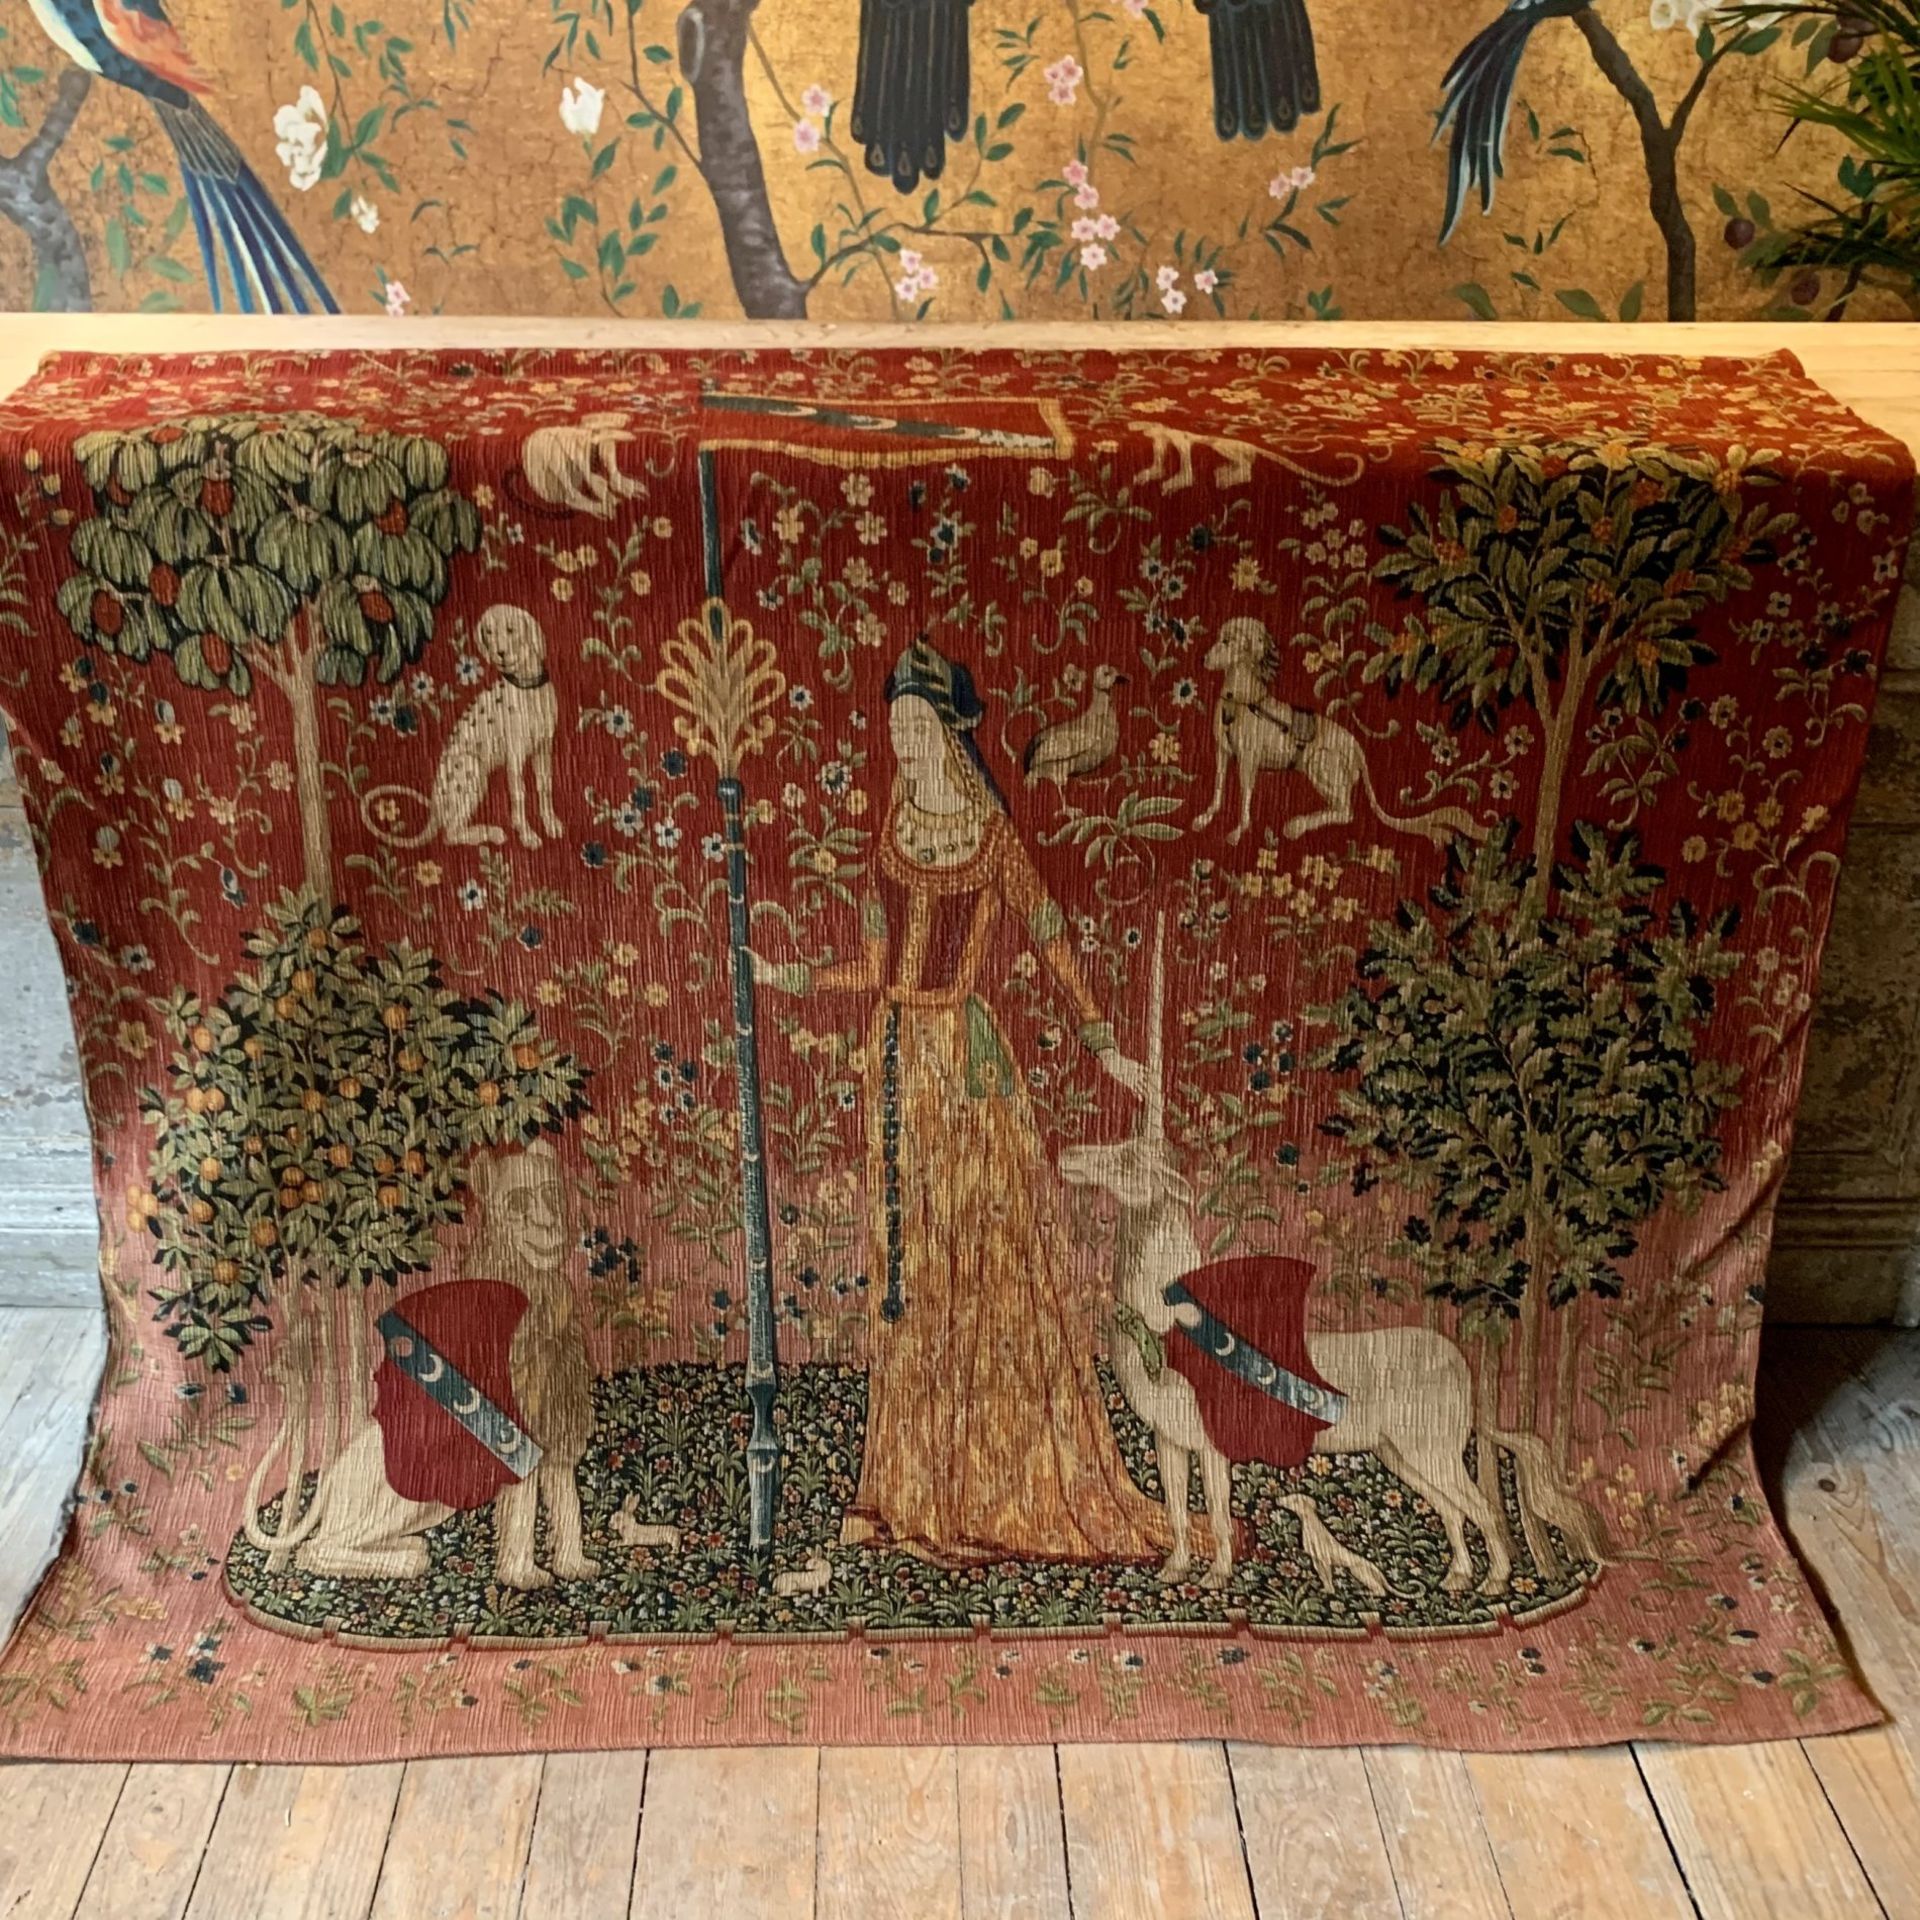 A MEDIEVAL STYLE TAPESTRY